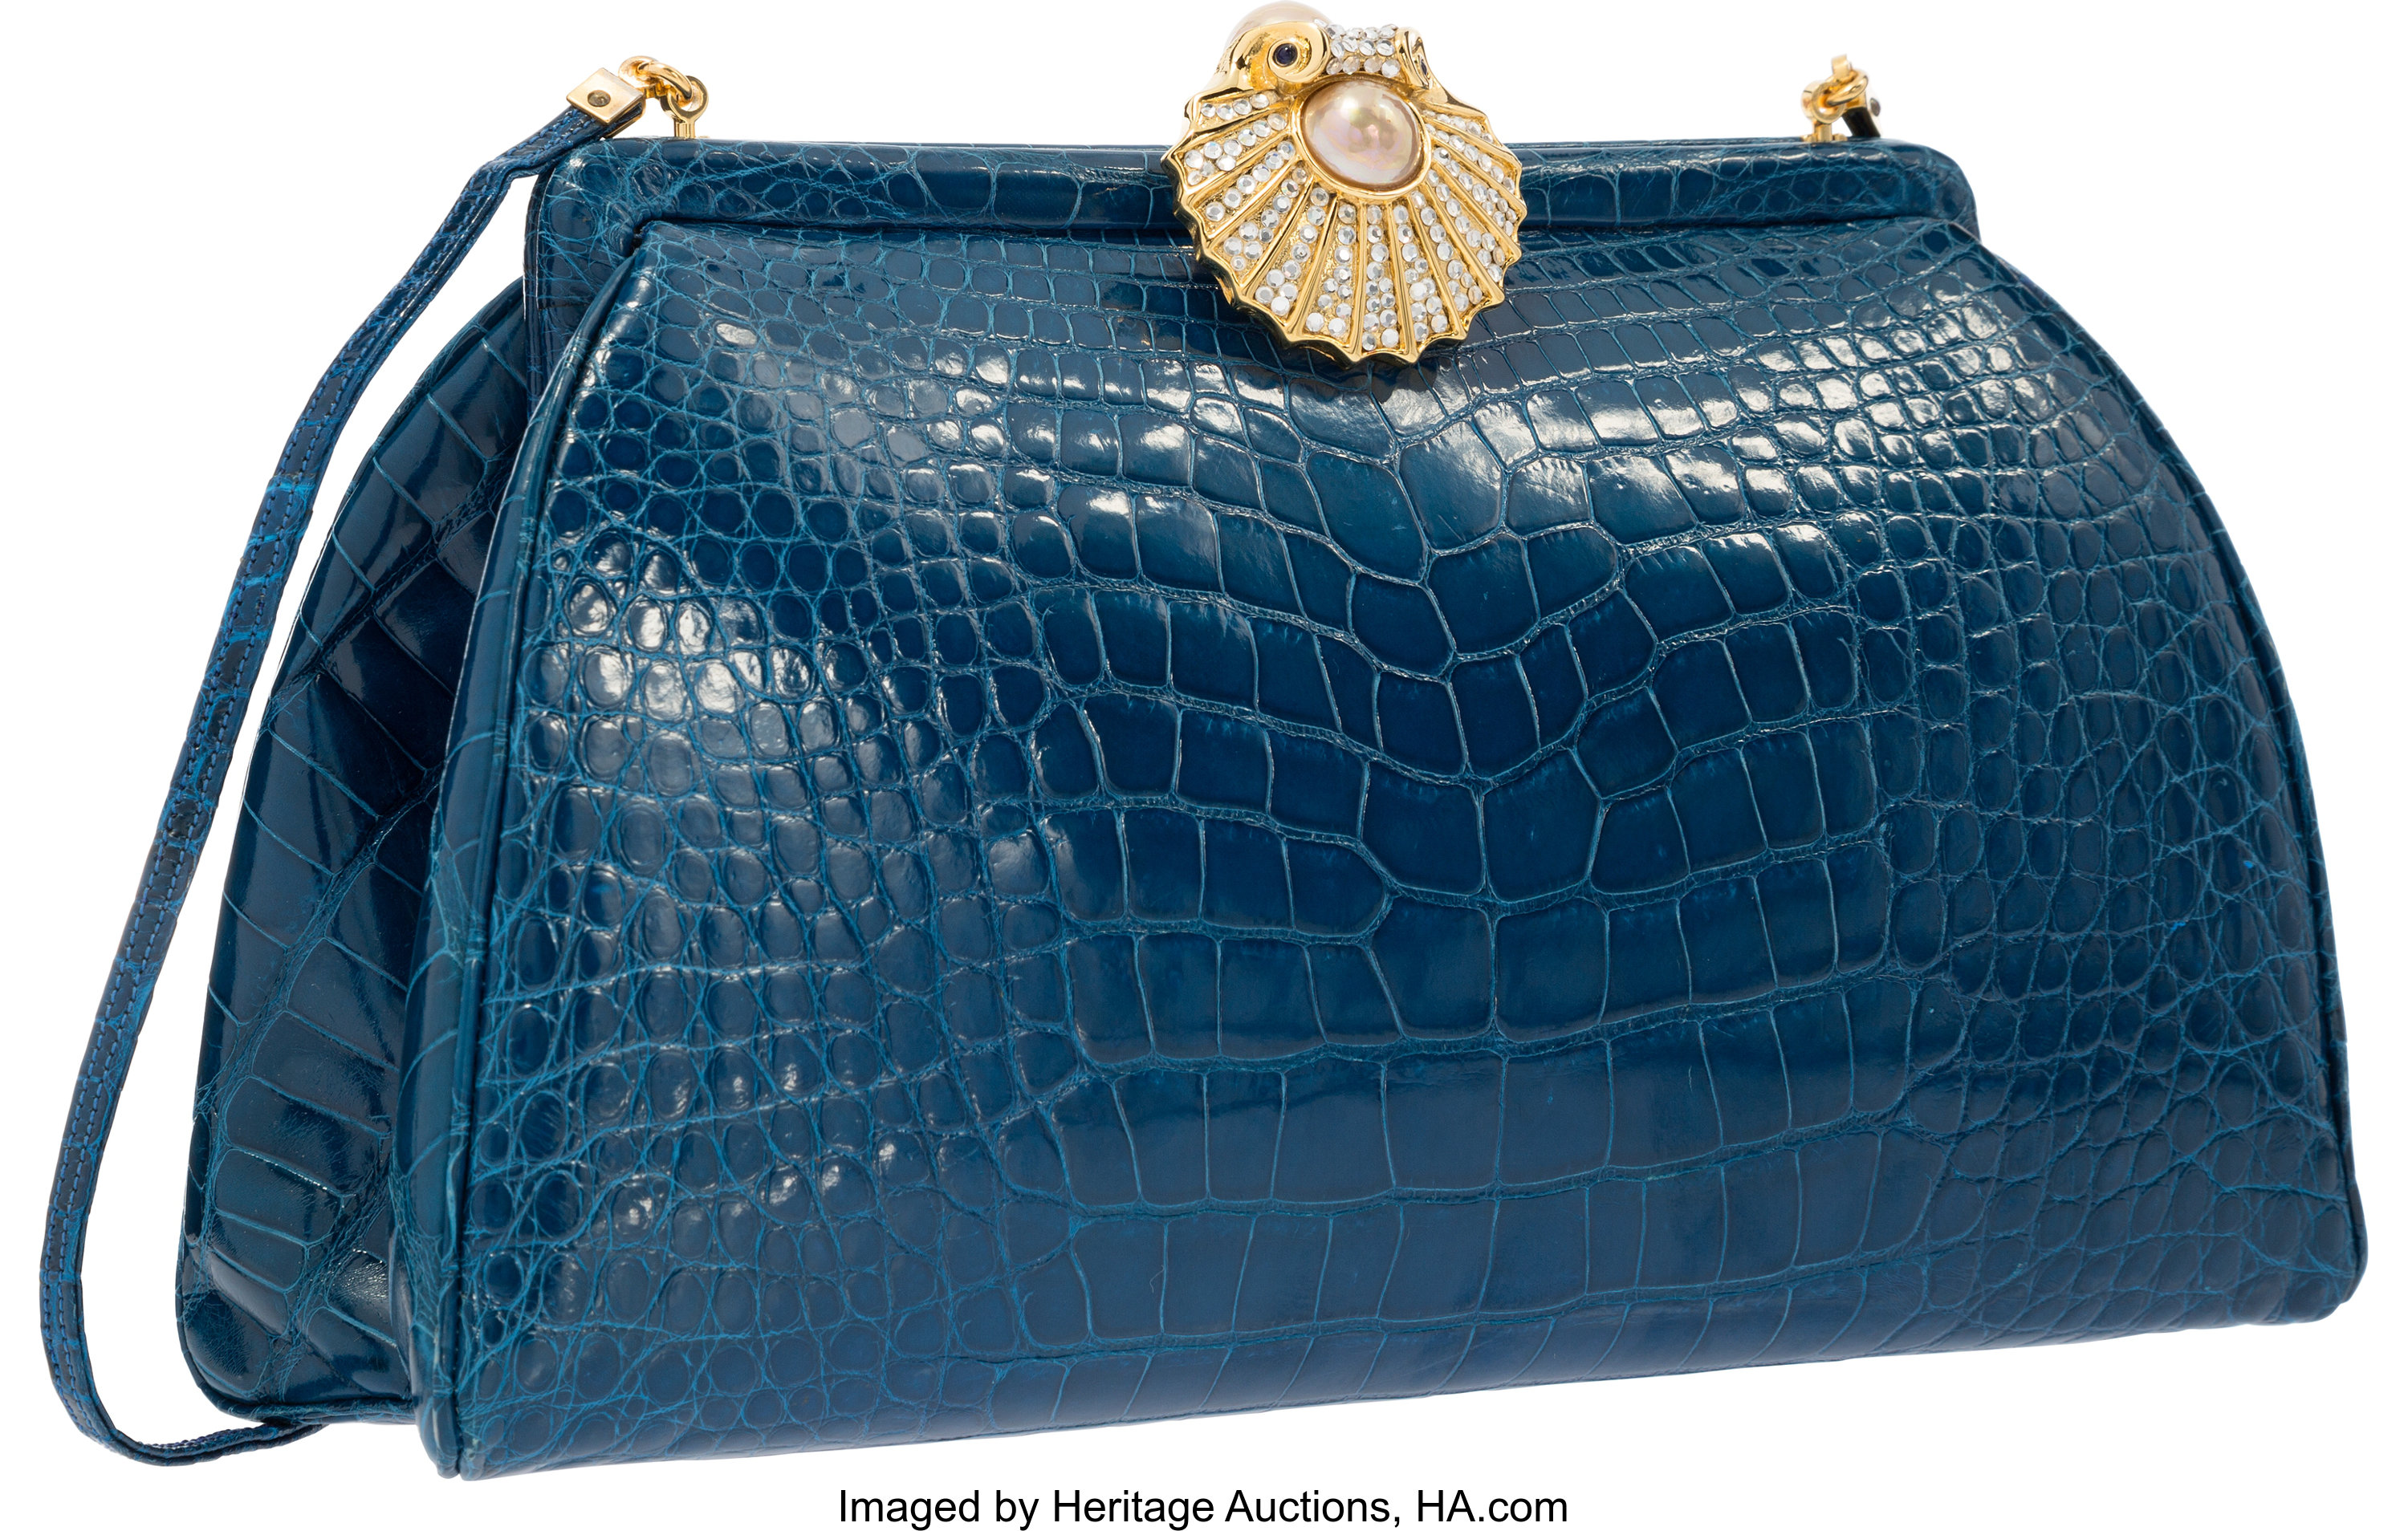 Judith Leiber's sparkly clutch bags have made a comeback - but the